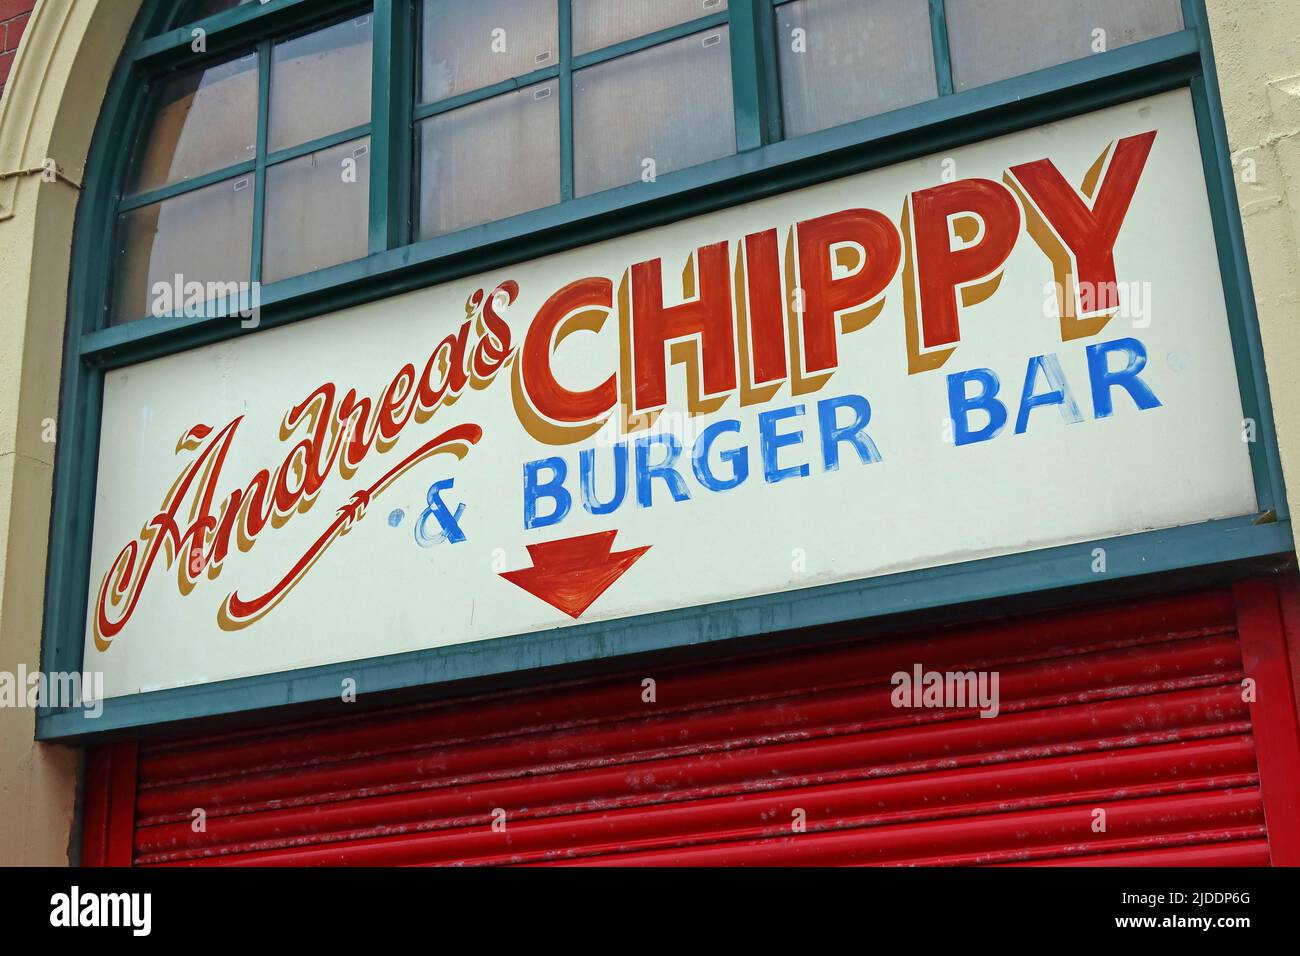 Andreas Chippy Burger bar Barry Island, isola, 3 rifugio occidentale, Paget Rd, Barry, Vale of Glamorgan, Galles, CF62 5TQ Foto Stock